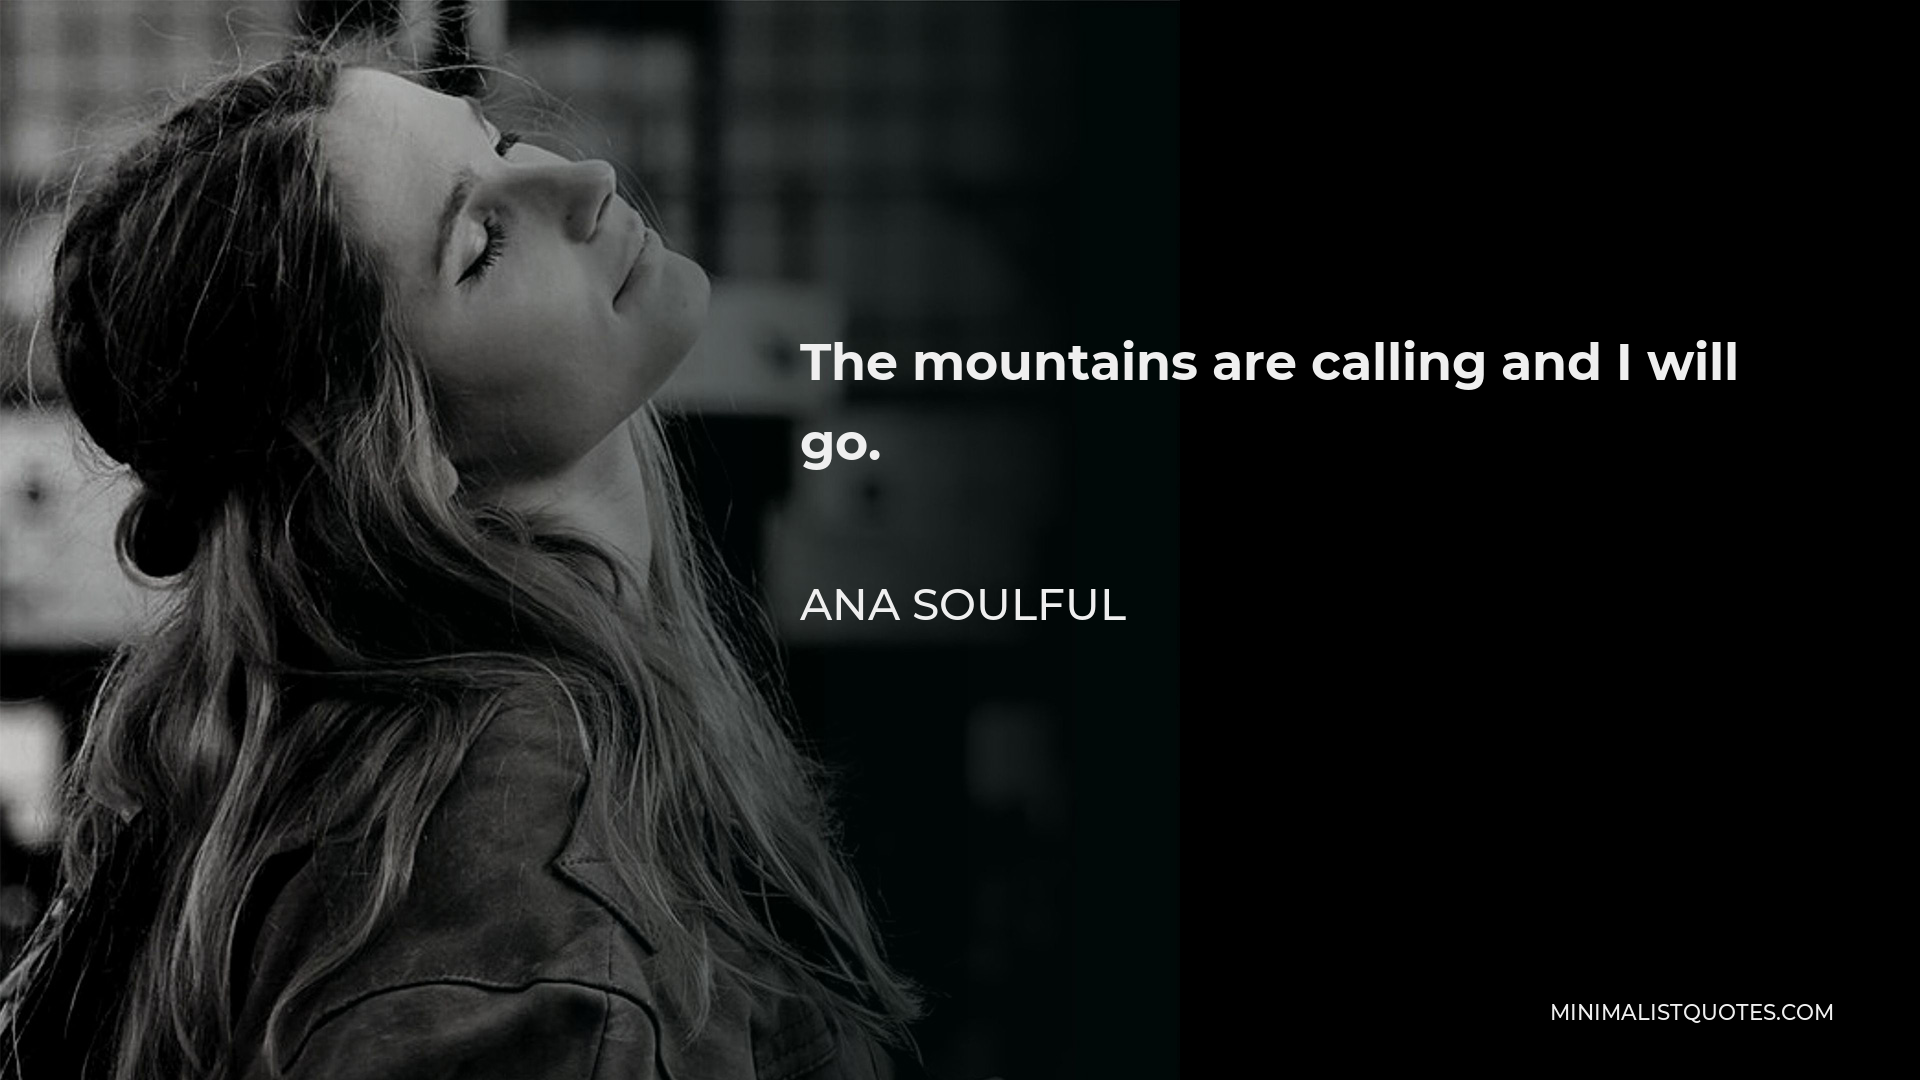 Ana Soulful Quote - The mountains are calling and I will go.